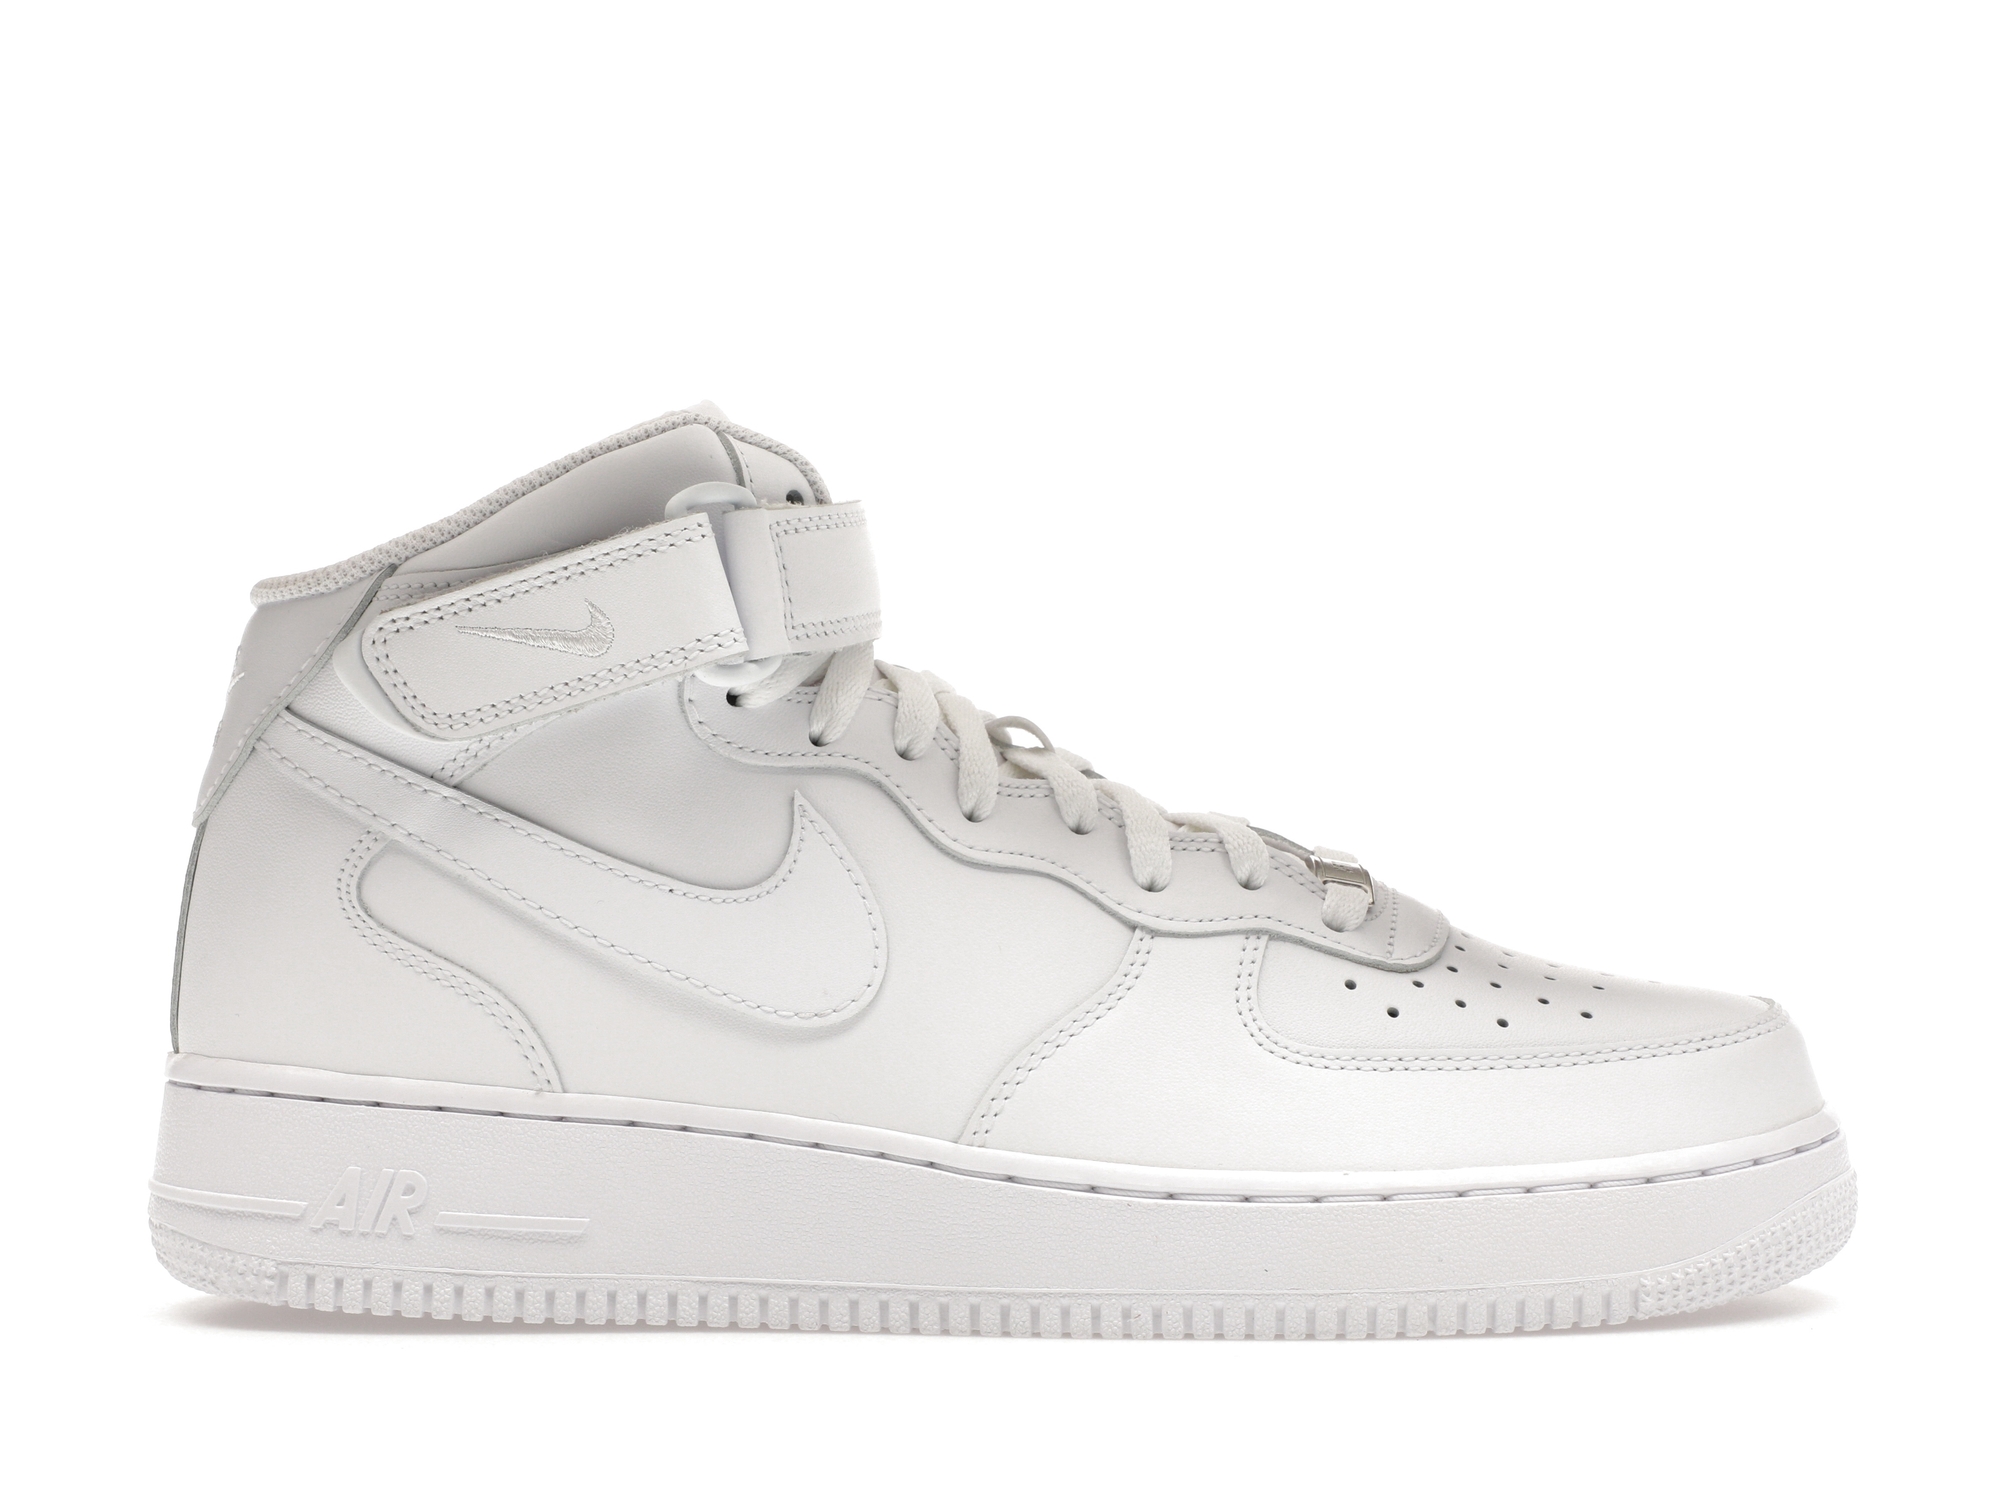 Nike Air Force 1 Mid '07 White Men's - 315123-111/CW2289-111 - US